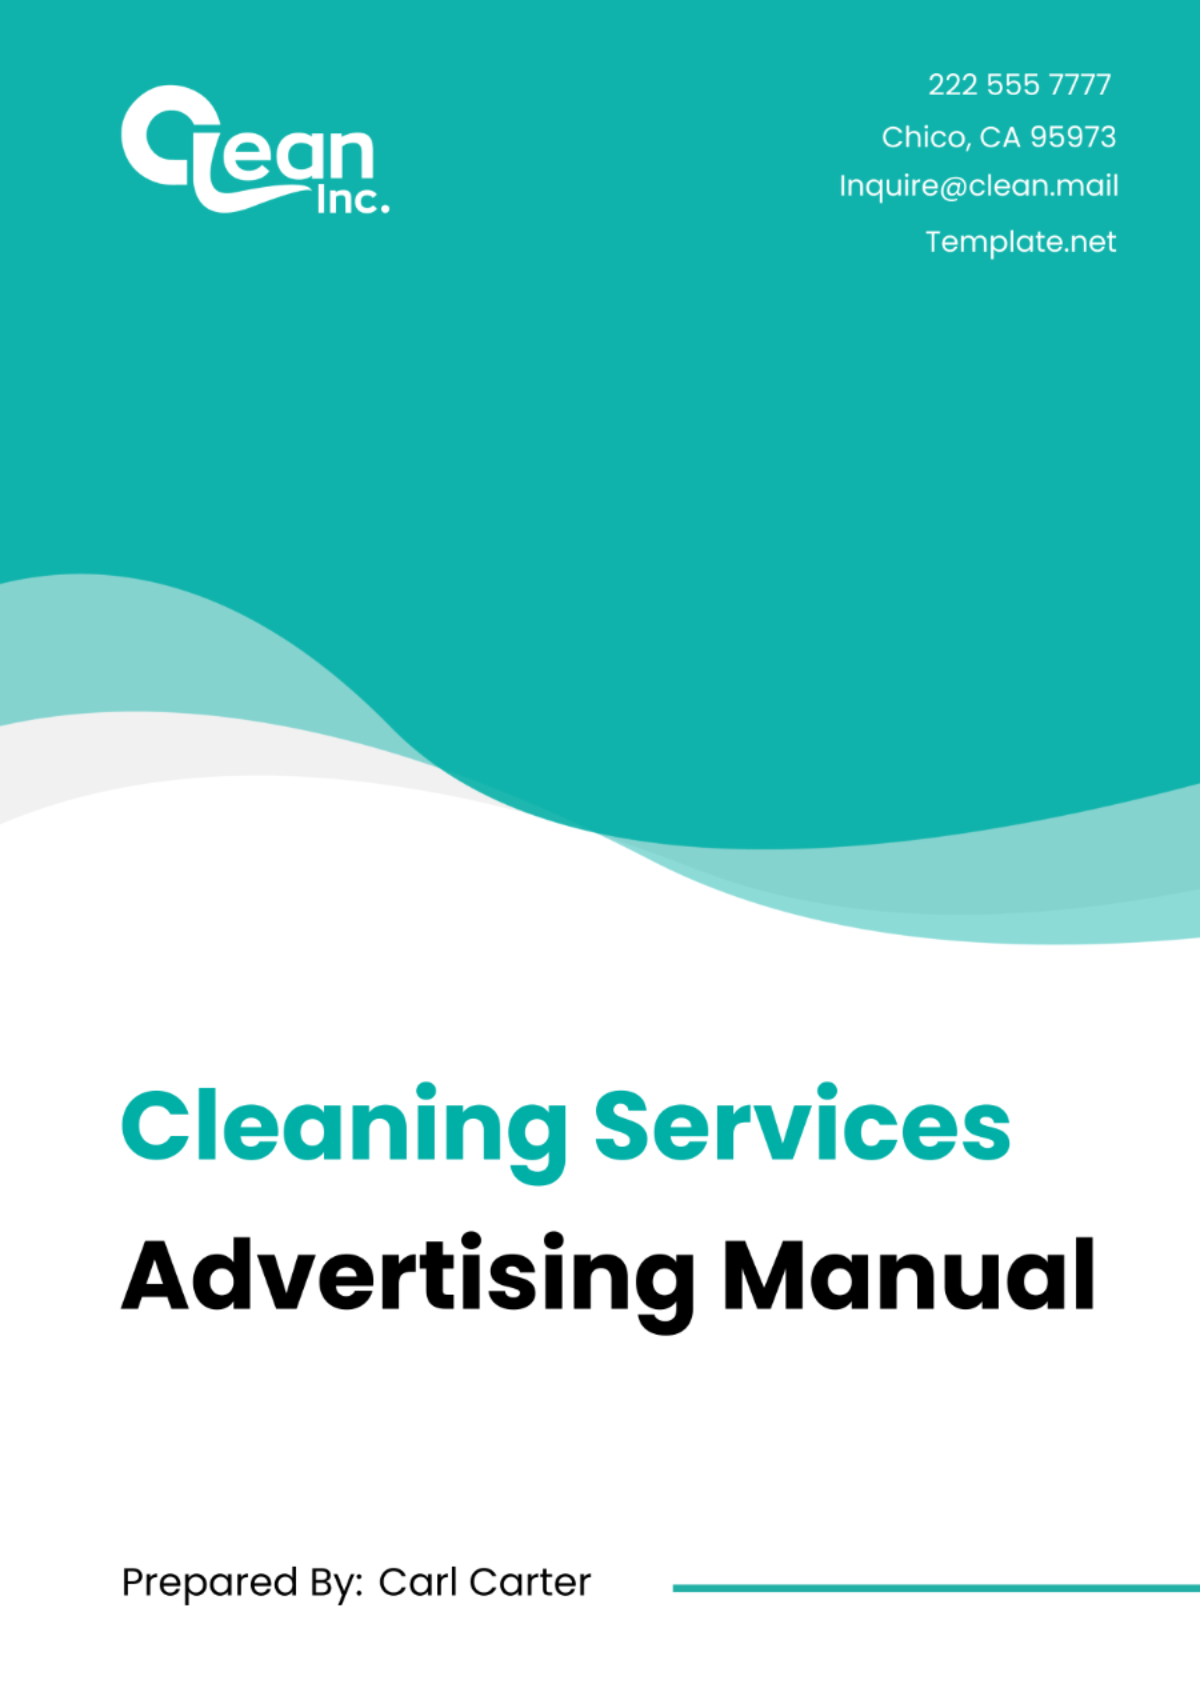 Cleaning Services Advertising Manual Template